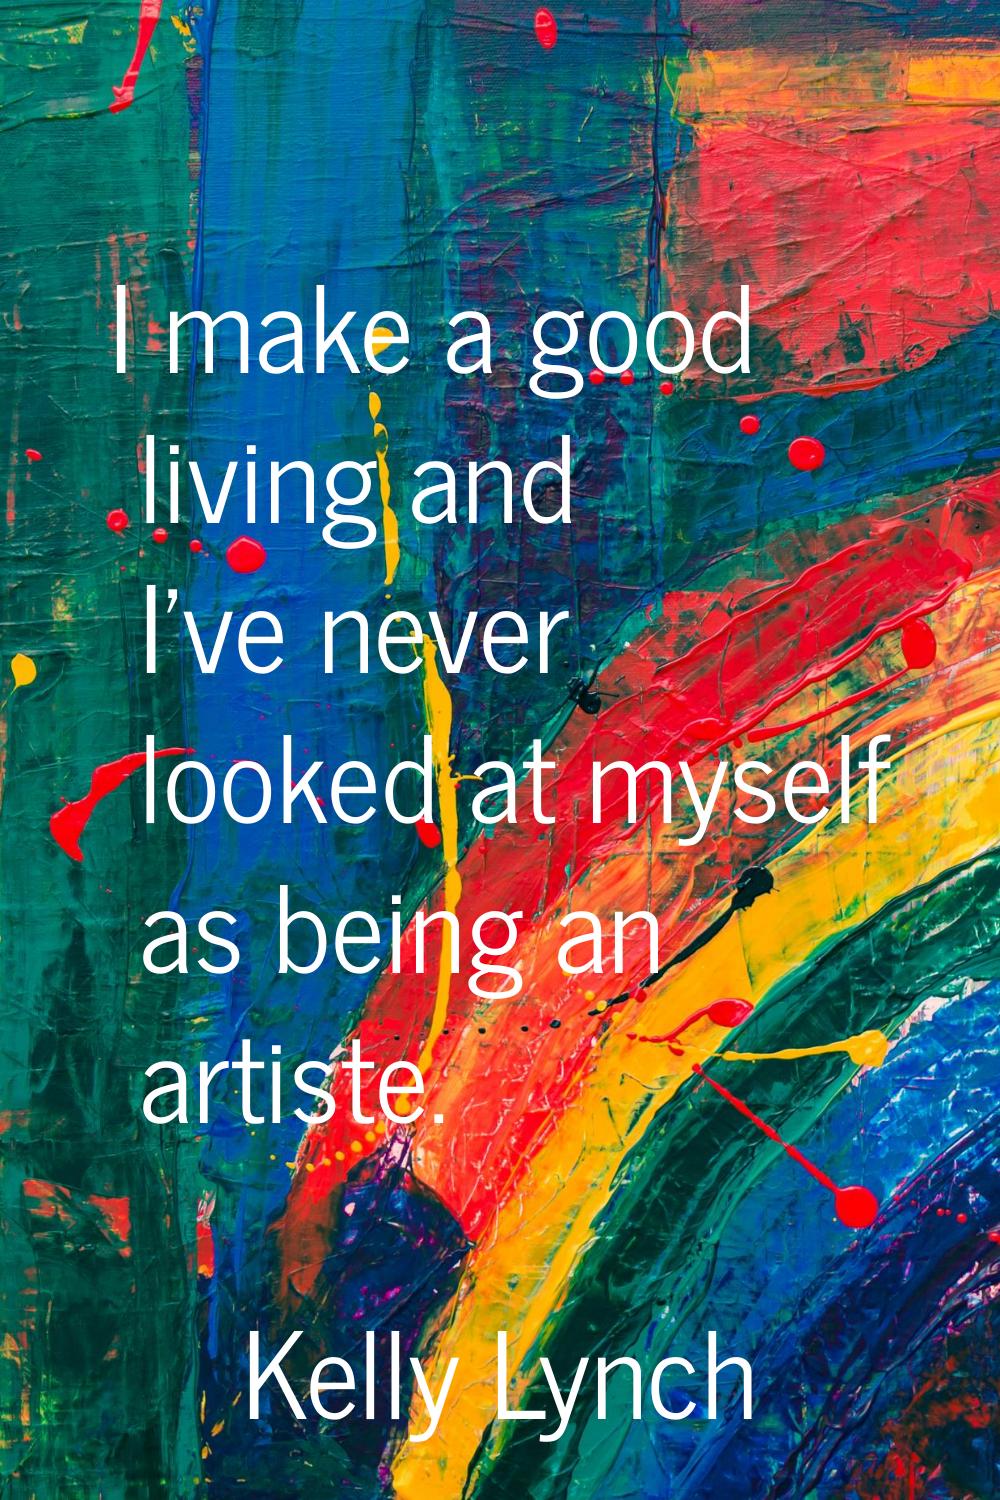 I make a good living and I've never looked at myself as being an artiste.